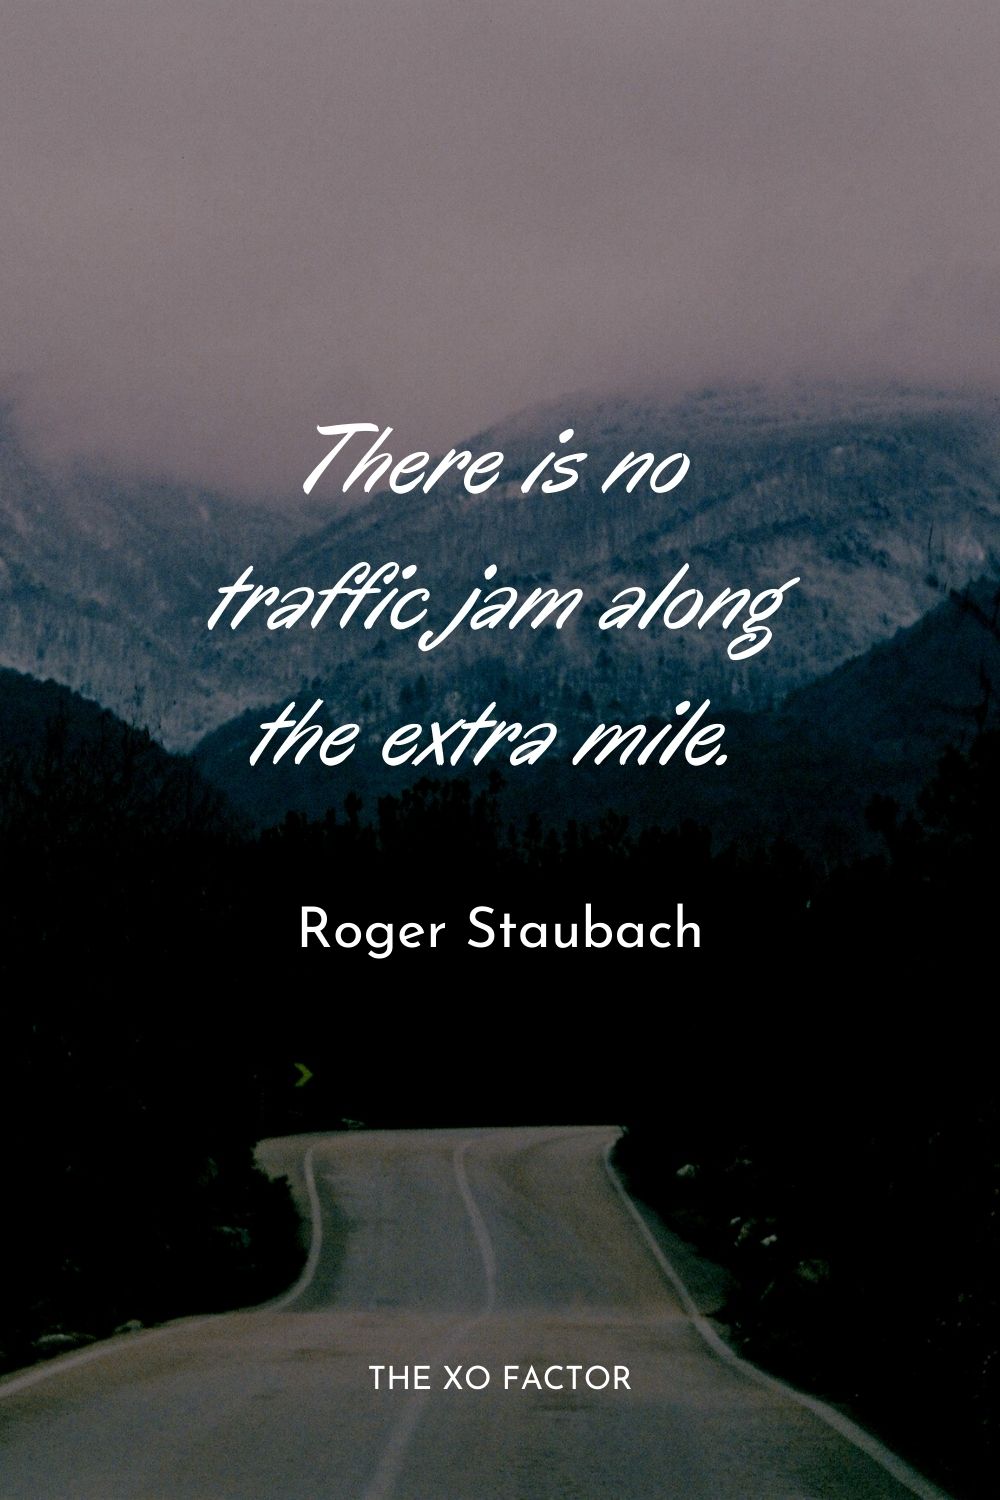 There is no traffic jam along the extra mile.